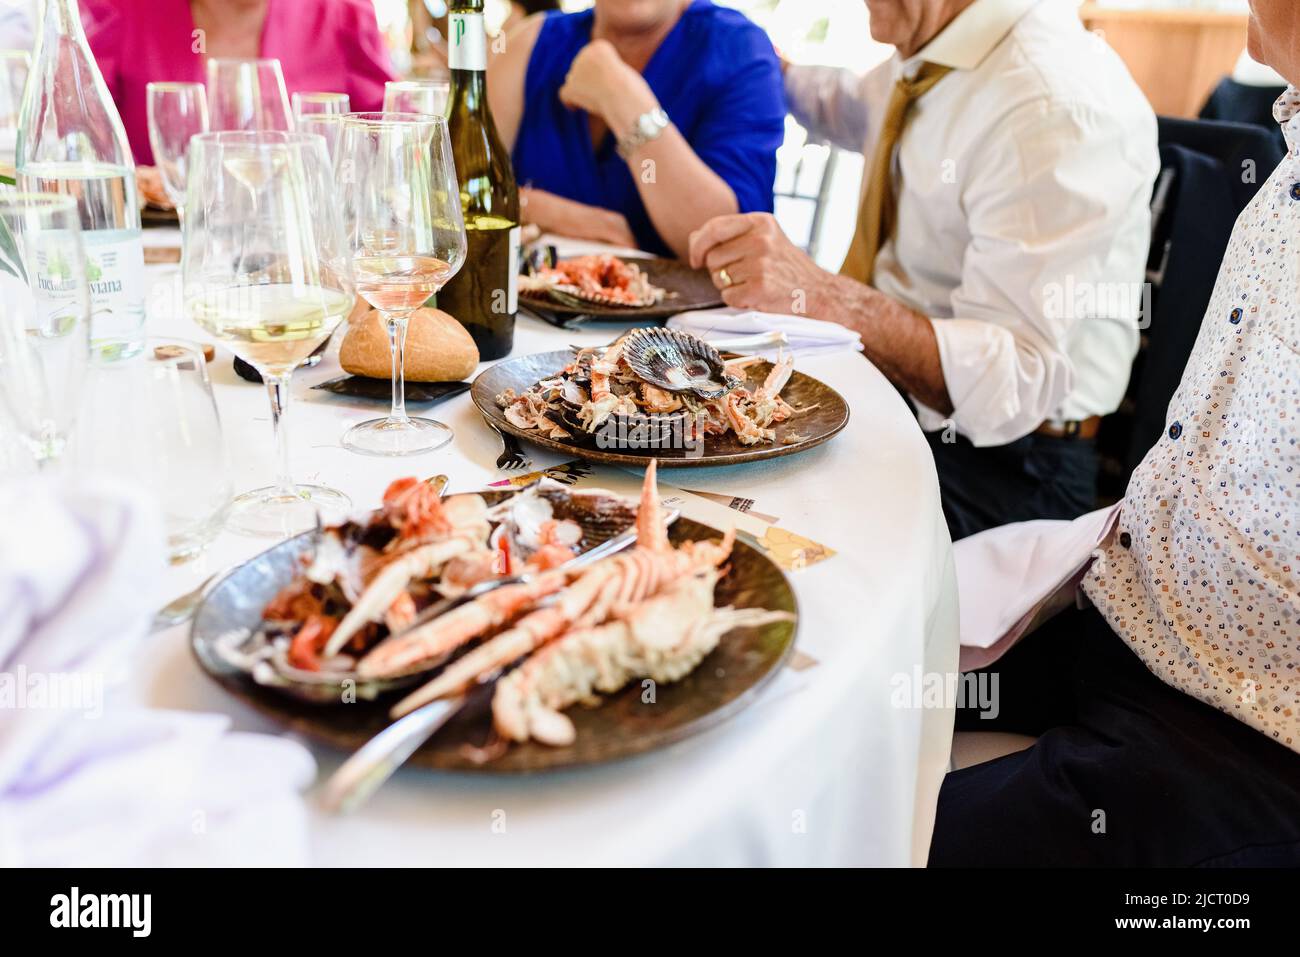 Diners have just had a seafood feast in a restaurant, plates full of leftovers. Stock Photo